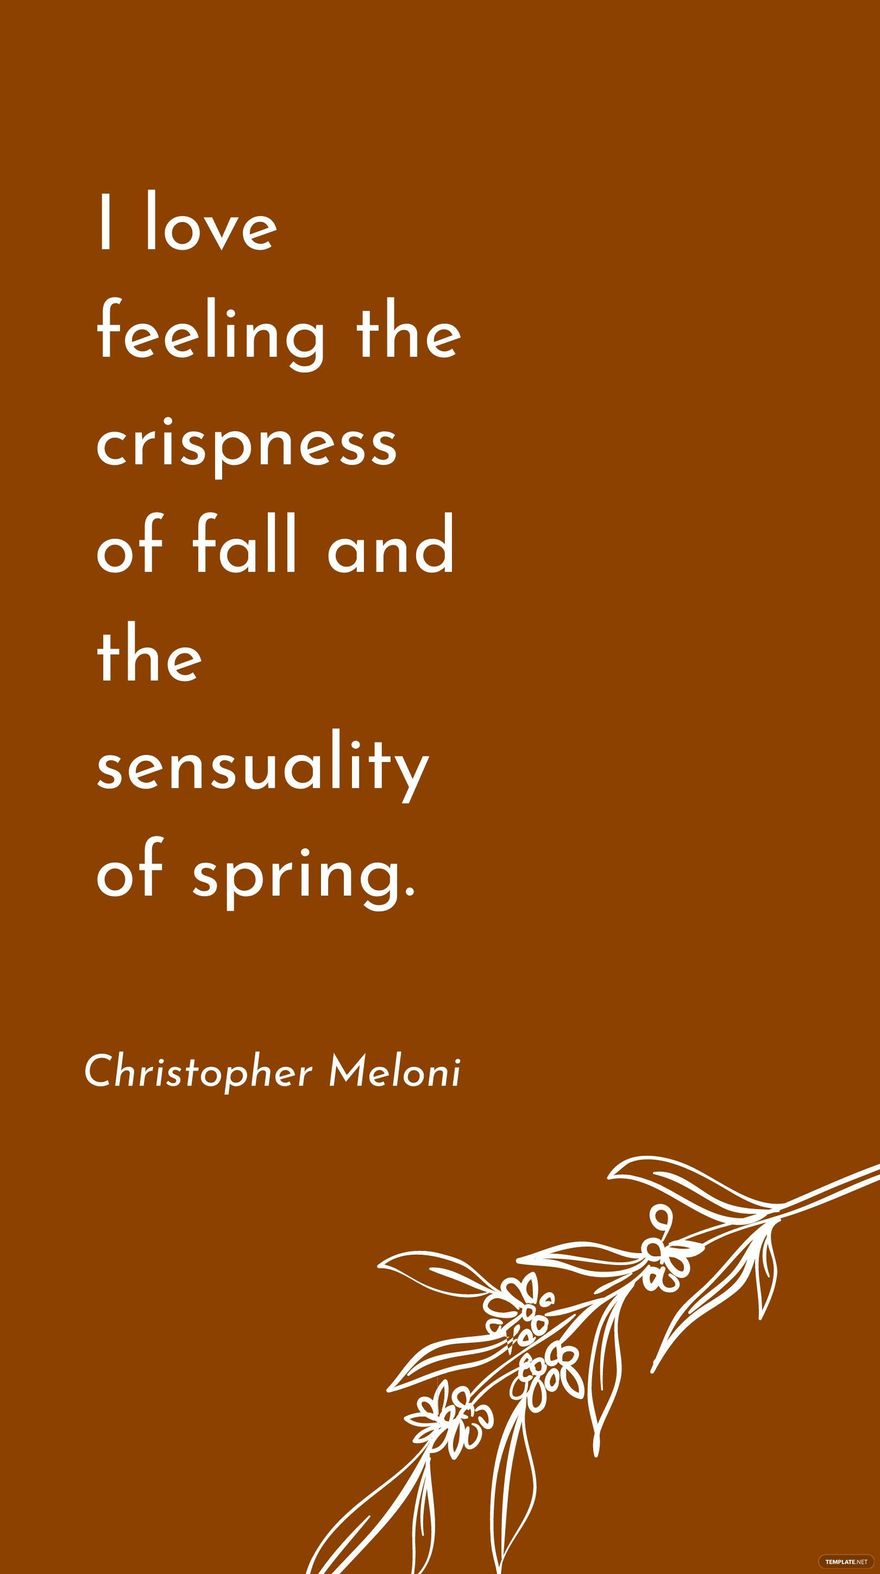 Free Christopher Meloni - I love feeling the crispness of fall and the sensuality of spring. in JPG